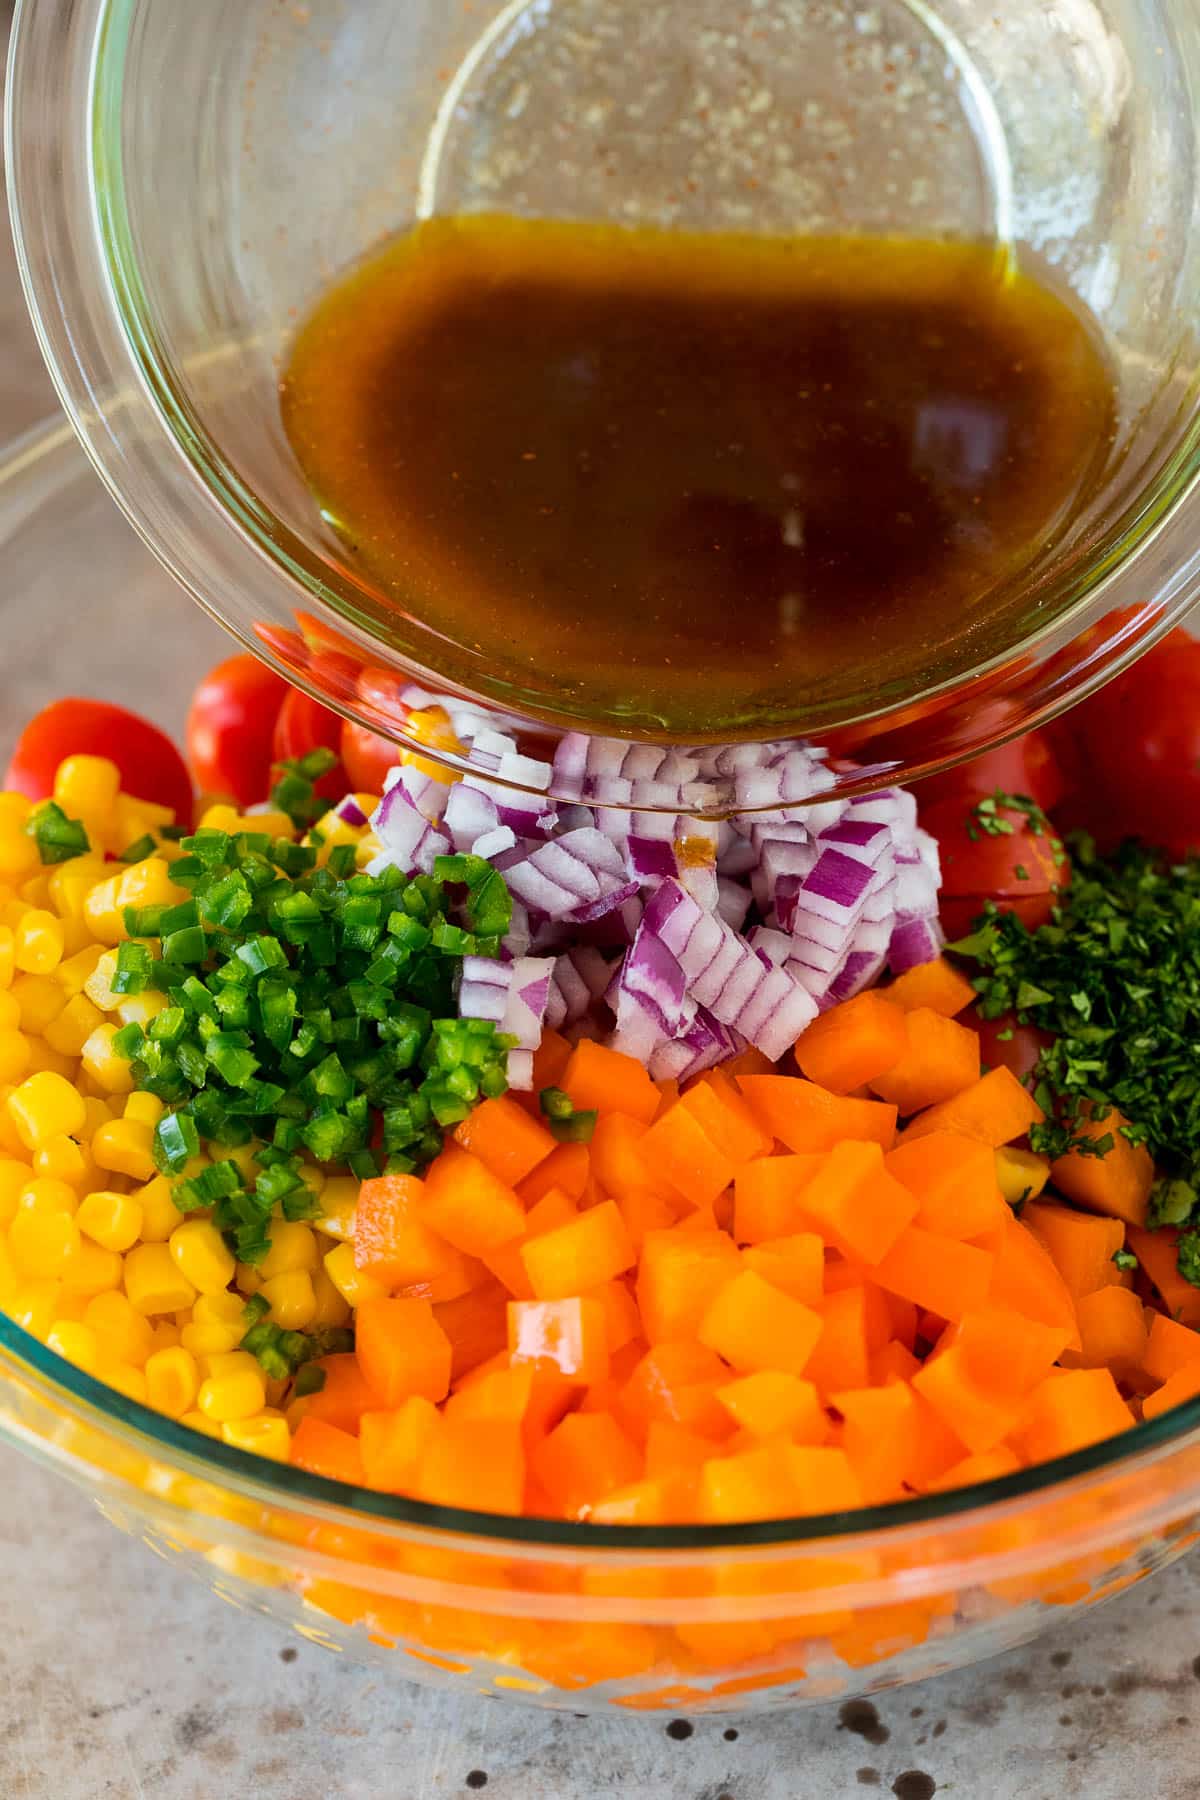 Dressing being poured over a bowl of vegetables.